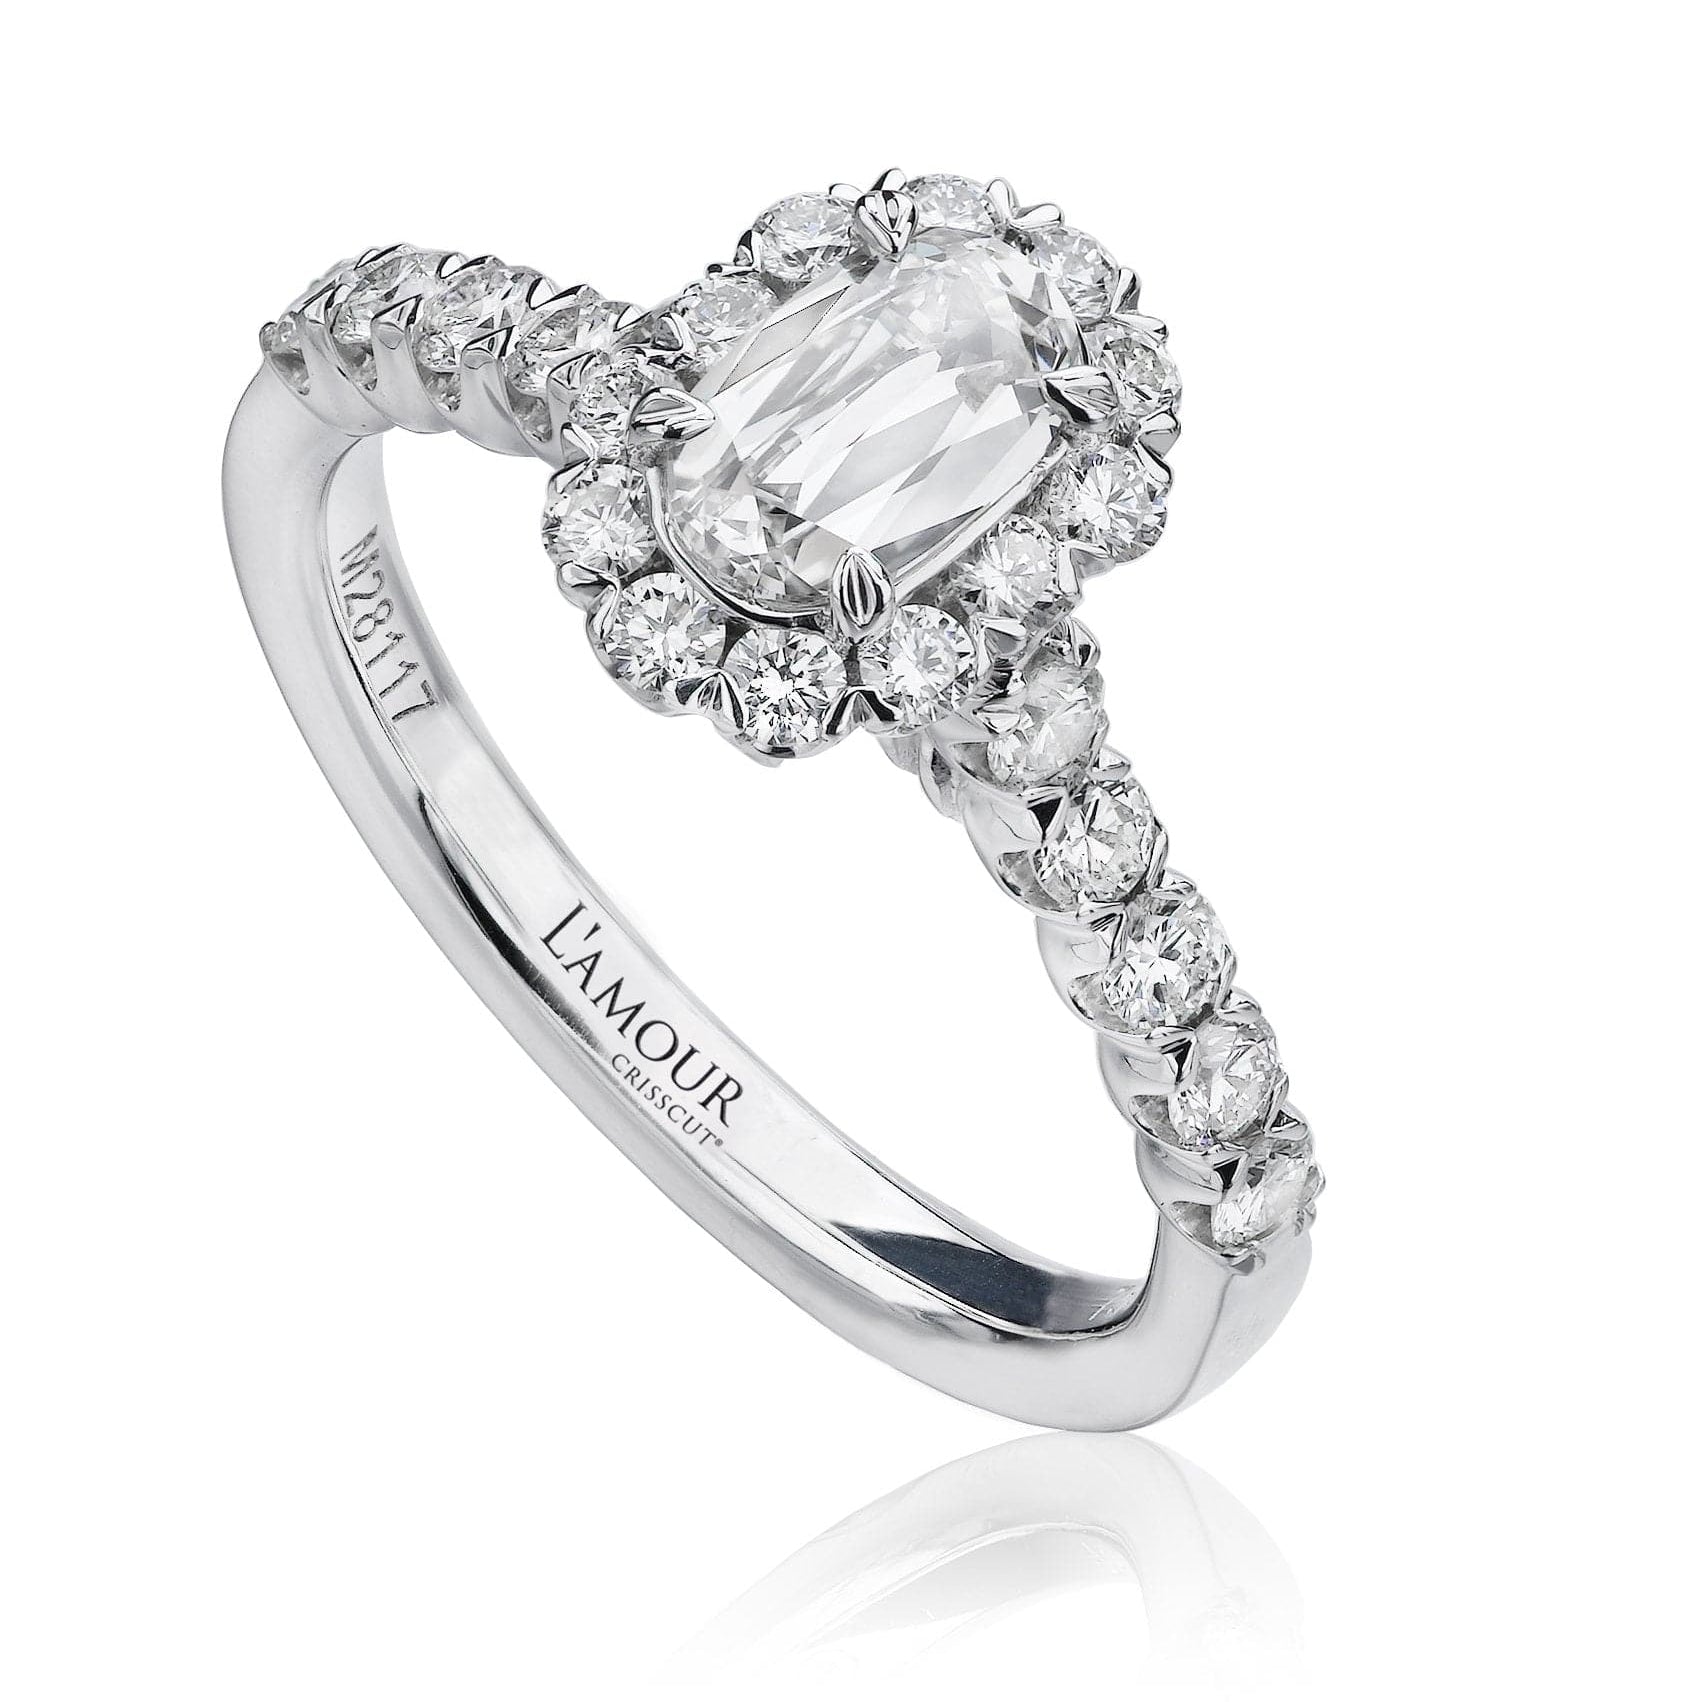 Christopher Designs Bridal Engagement Ring 18K White Gold L'Amour Crisscut Oval .56ct Halo Engagement Ring 6.5